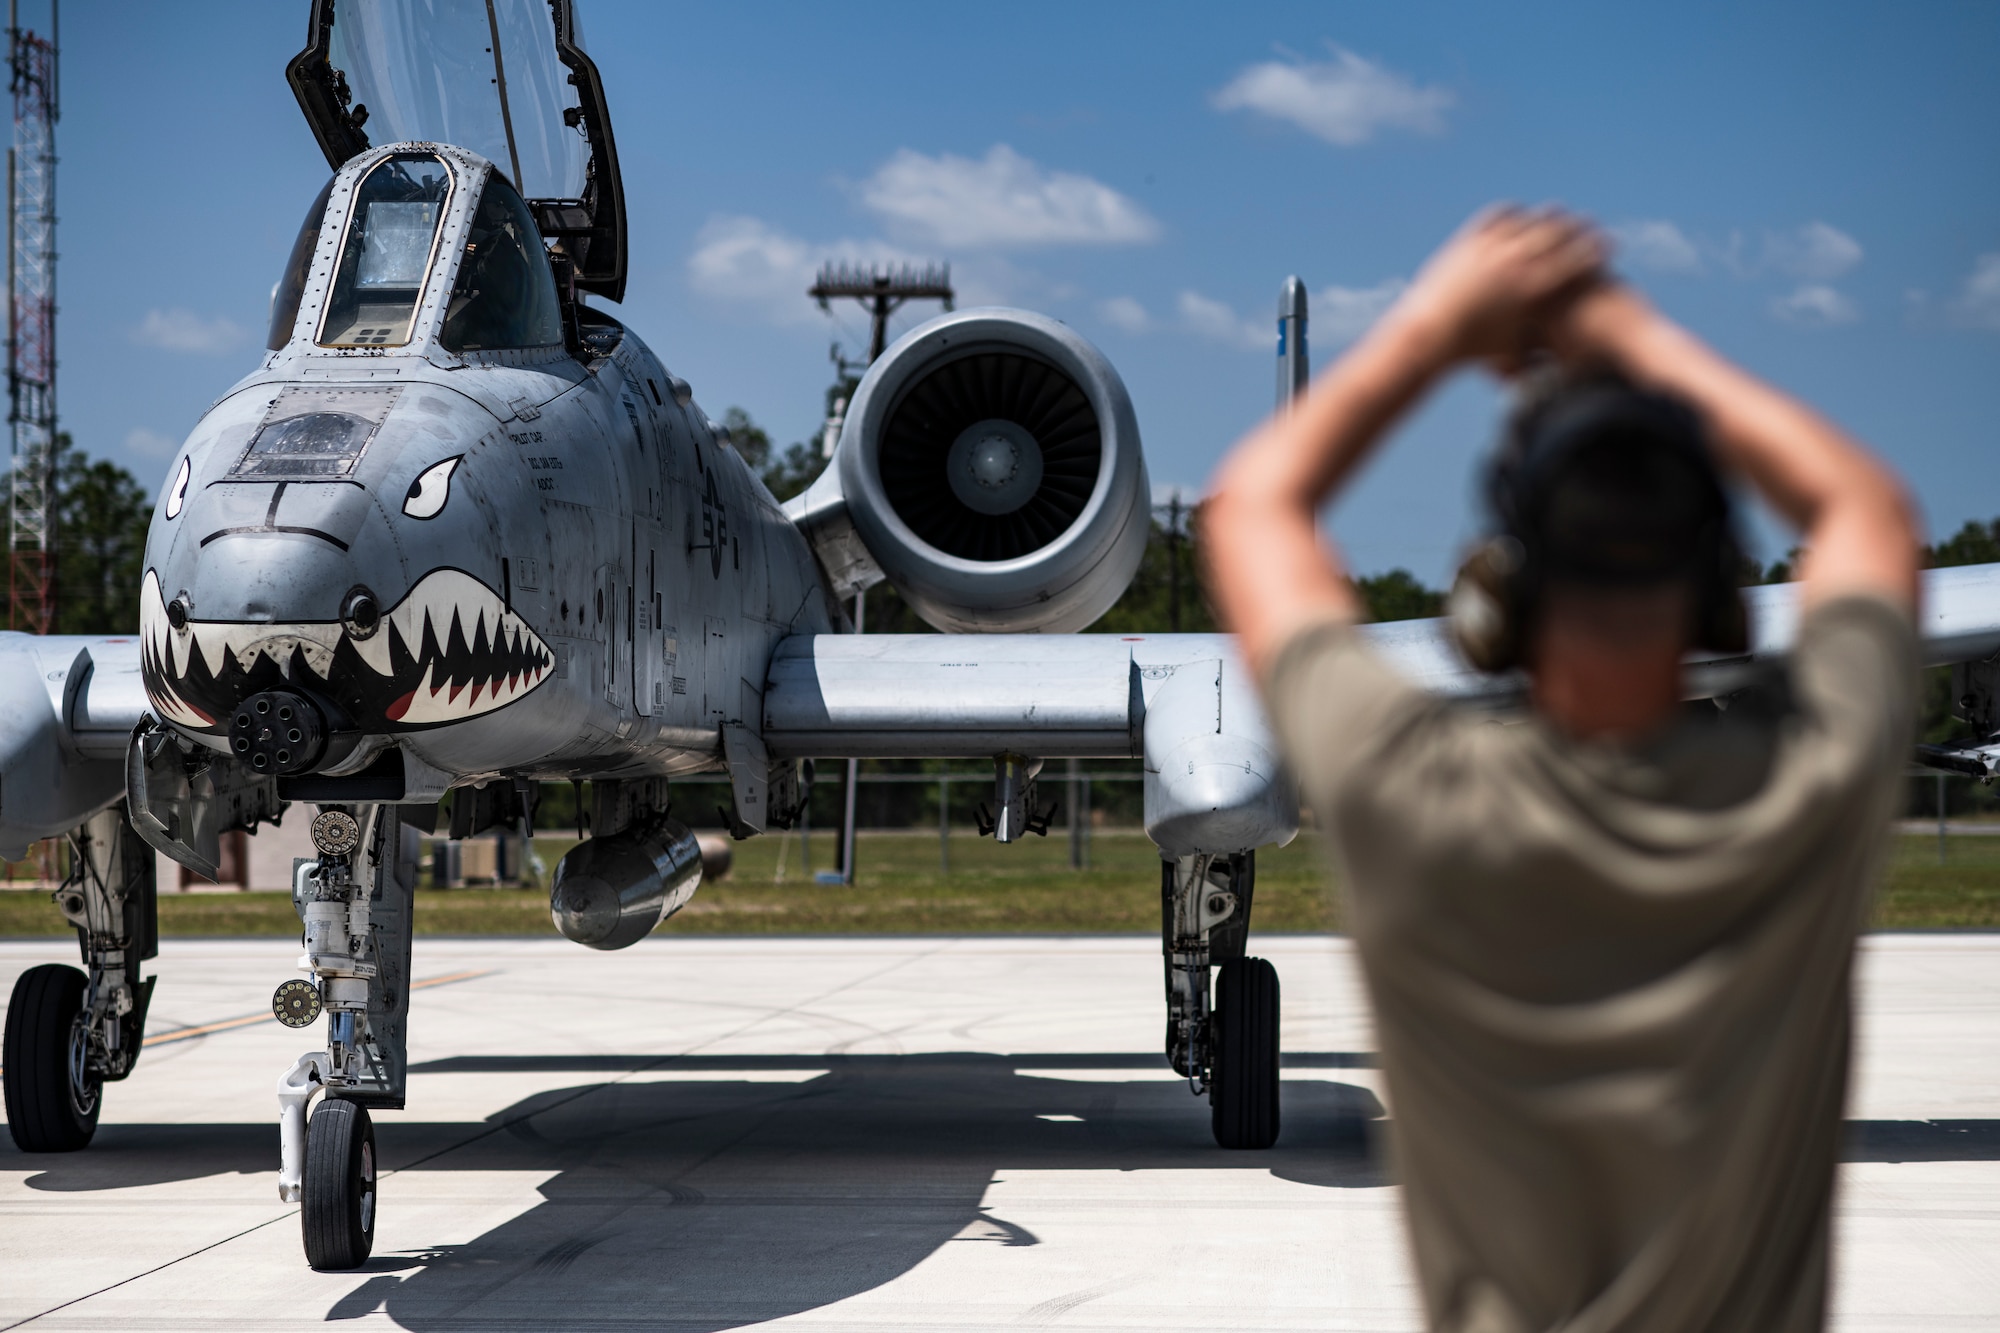 A U.S. Air Force pilot assigned to the 74th Fighter Squadron parks an A-10C Thunderbolt II with the assistance of an Airman assigned to the 74th Fighter Generation Squadron during Exercise Ready Tiger 24-1 at Avon Park Air Force Range, Florida, April 10, 2024. The 74th FS conducted flying operations for the exercise, responding to planned scenarios in a simulated Indo-Pacific area of responsibility. During Ready Tiger 24-1, exercise inspectors will assess the 23rd Wing's proficiency in employing decentralized command and control to fulfill air tasking orders across geographically dispersed areas amid communication challenges, integrating Agile Combat Employment principles such as integrated combat turns, forward aerial refueling points, multi-capable Airmen, and combat search and rescue capabilities. (U.S. Air Force photo by Tech. Sgt. Devin Boyer)